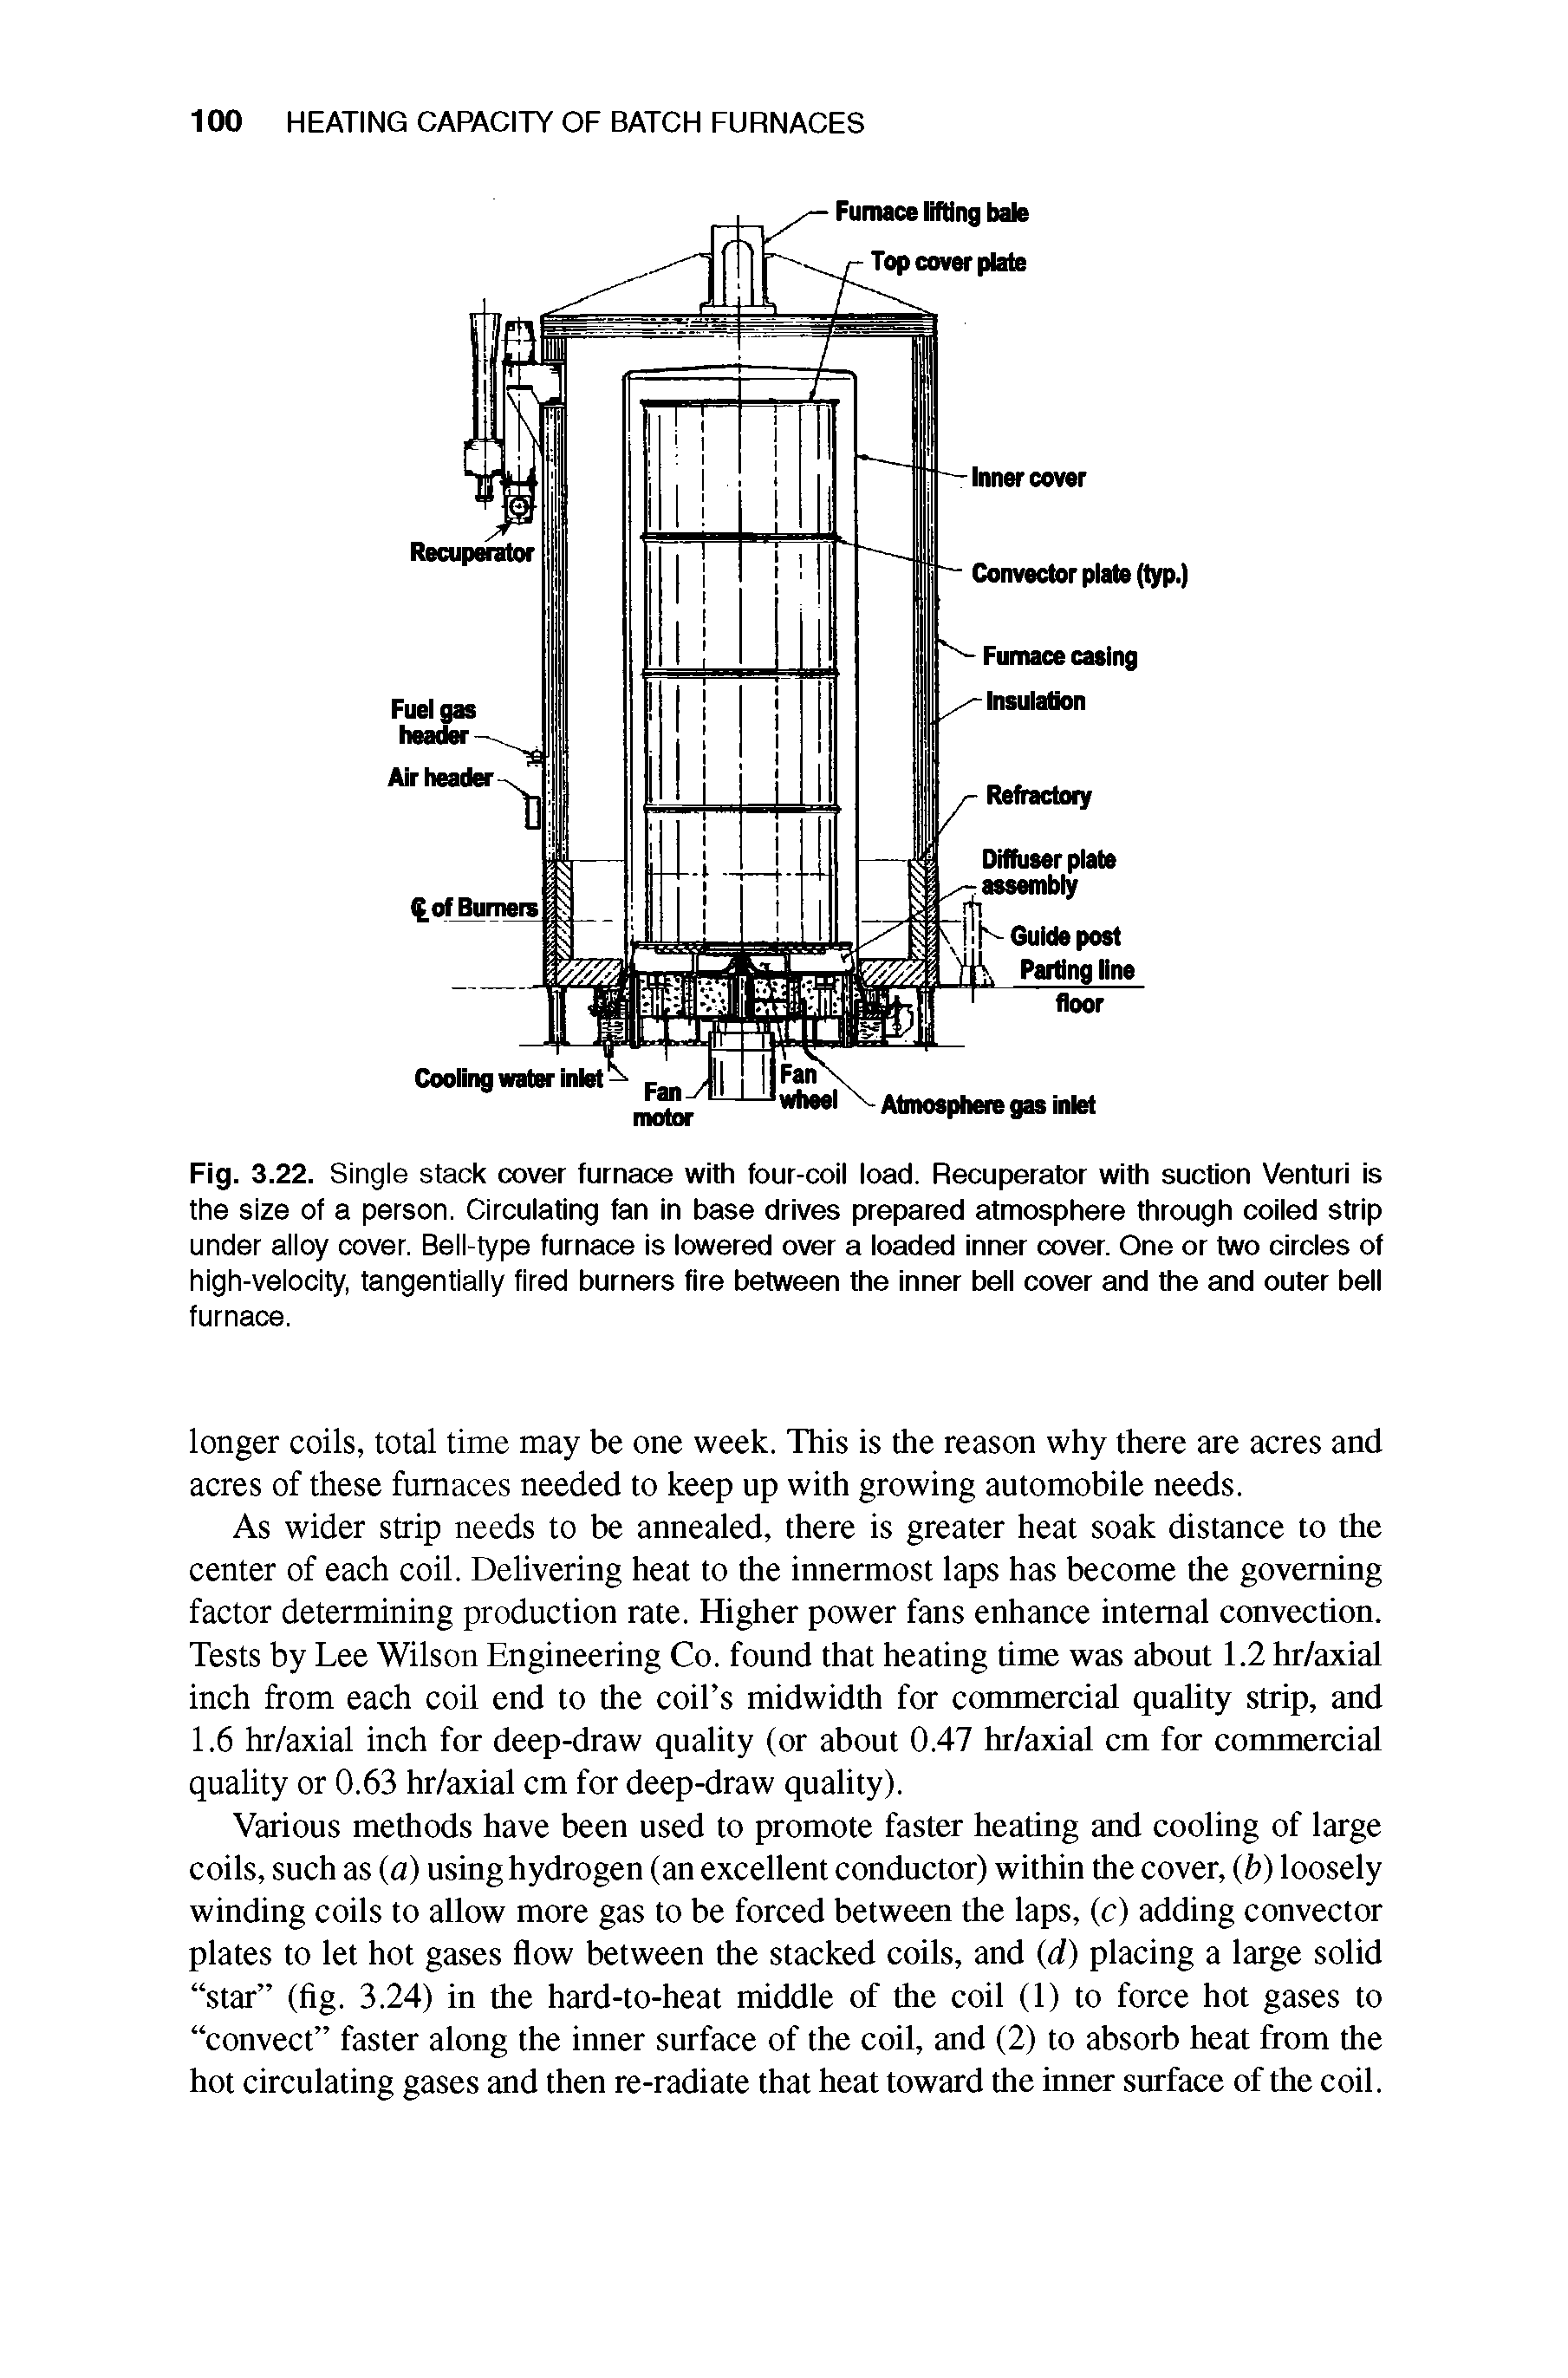 Fig. 3.22. Single stack cover furnace with four-coii ioad. Recuperator with suction Venturi is the size of a person. Circulating fan in base drives prepared atmosphere through coiied strip under alloy cover. Bell-type furnace is lowered over a loaded inner cover. One or two circles of high-velocity, tangentially fired burners fire between the inner bell cover and the and outer bell furnace.